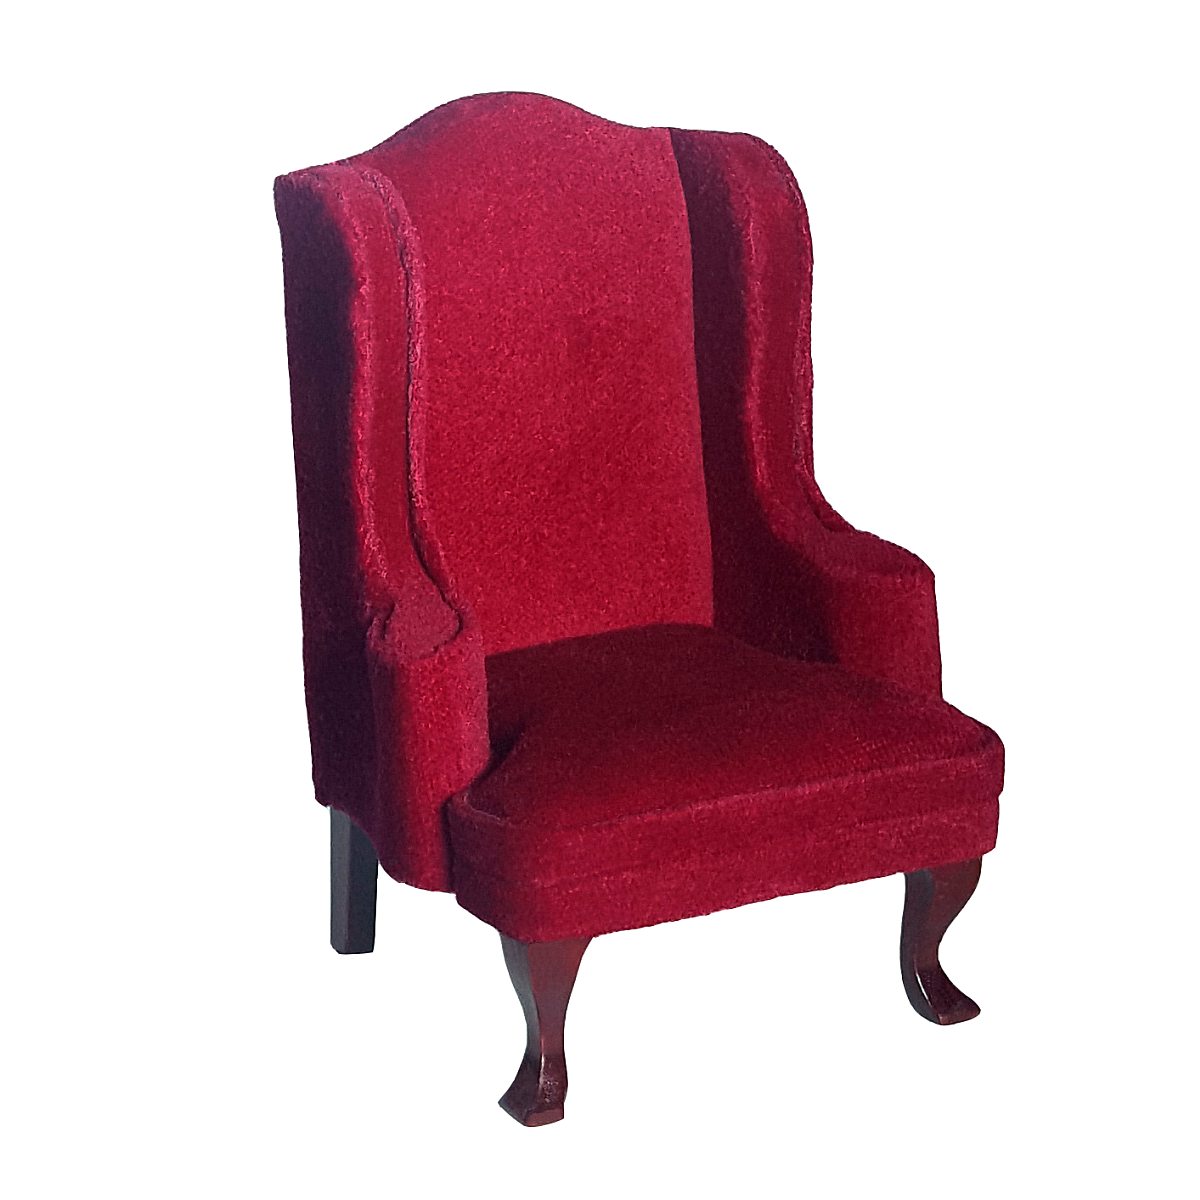 Wing chair, red velvet upholstery　ウィングチェア、赤いベルベット・完成品